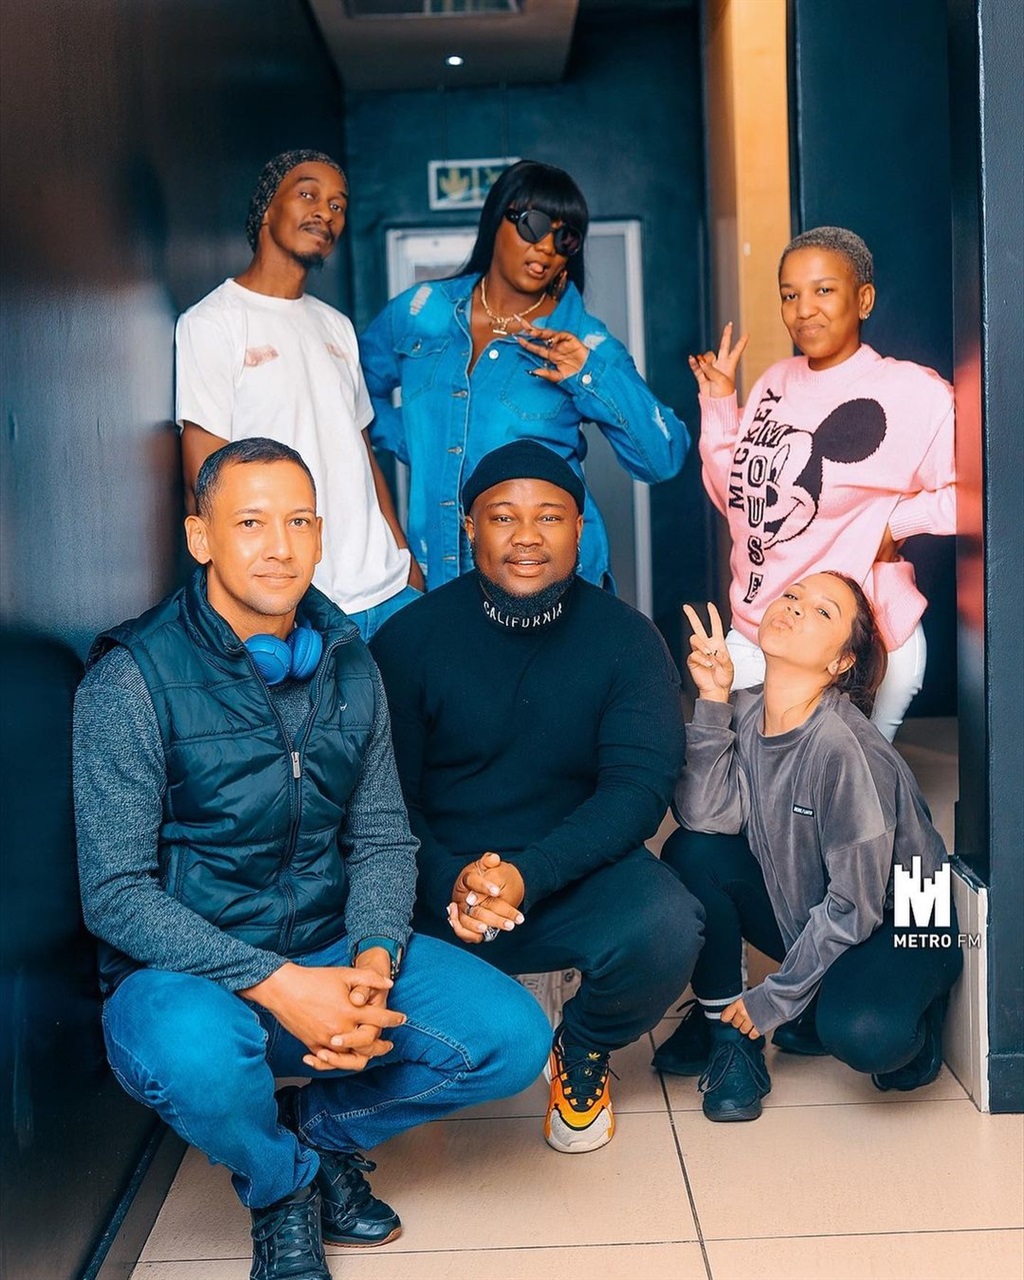 Shauwn Mkhize visited Metro FM to talk about her m